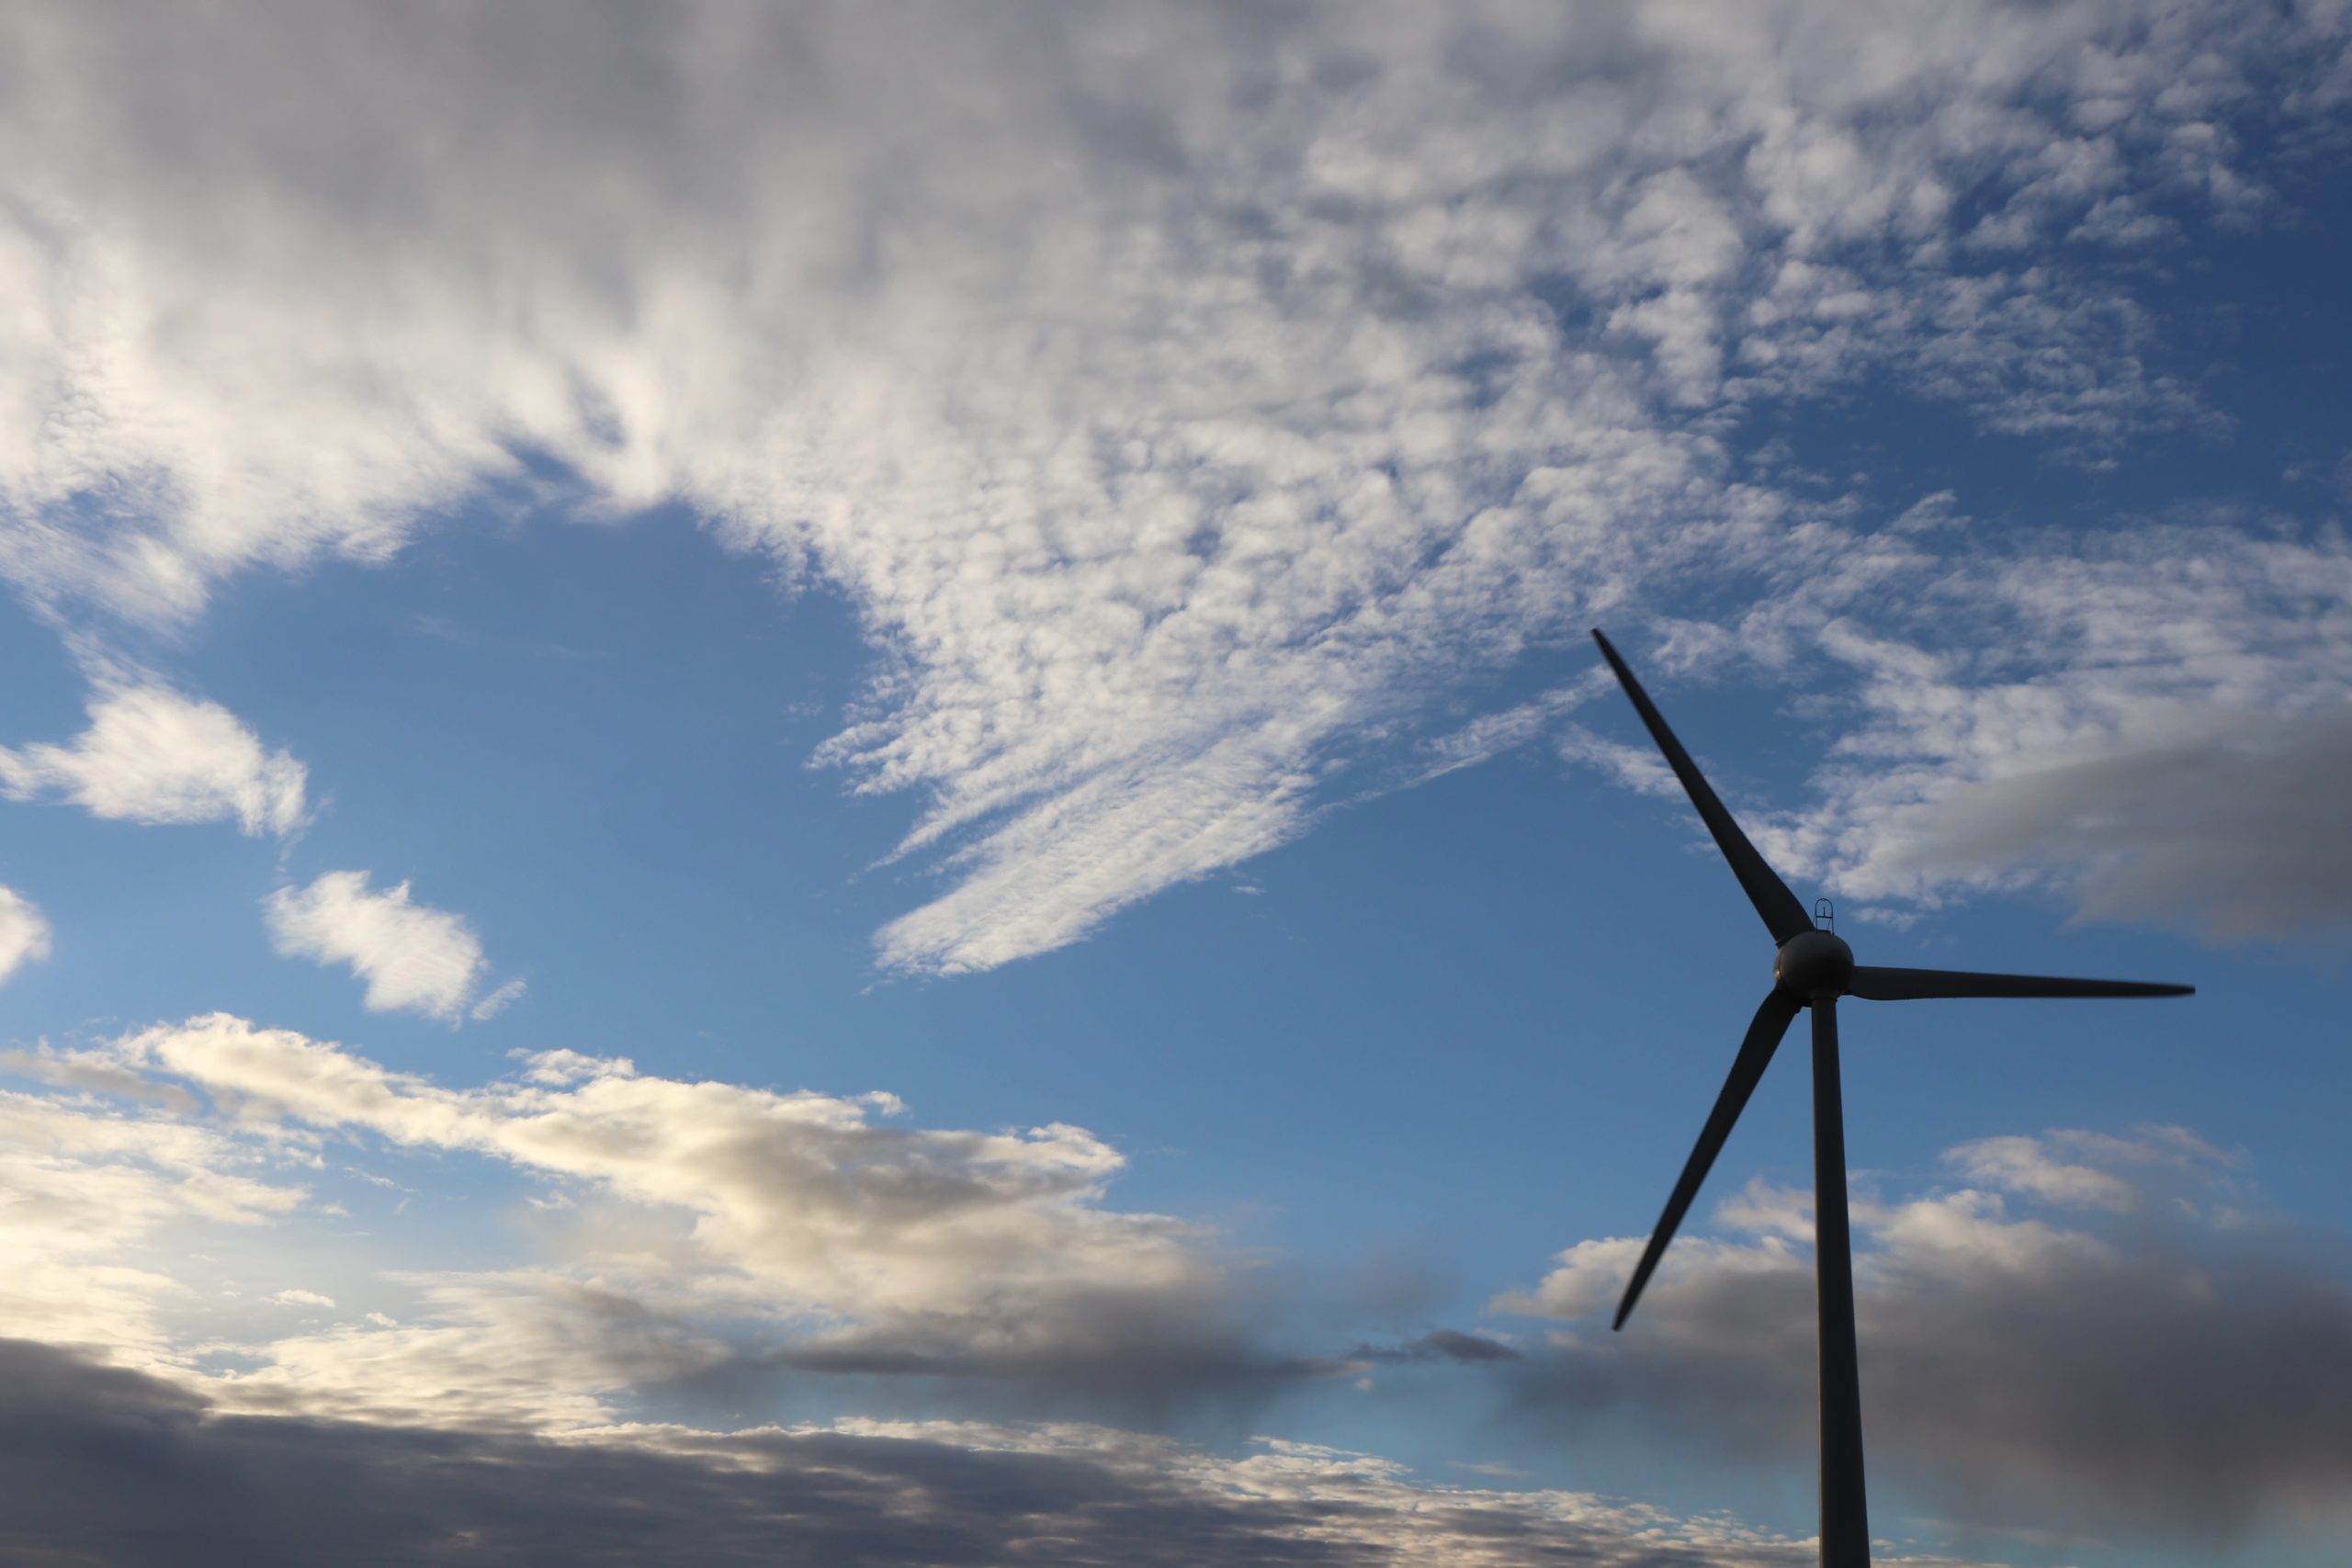 Shell to buy power from world’s ‘largest offshore wind farm’